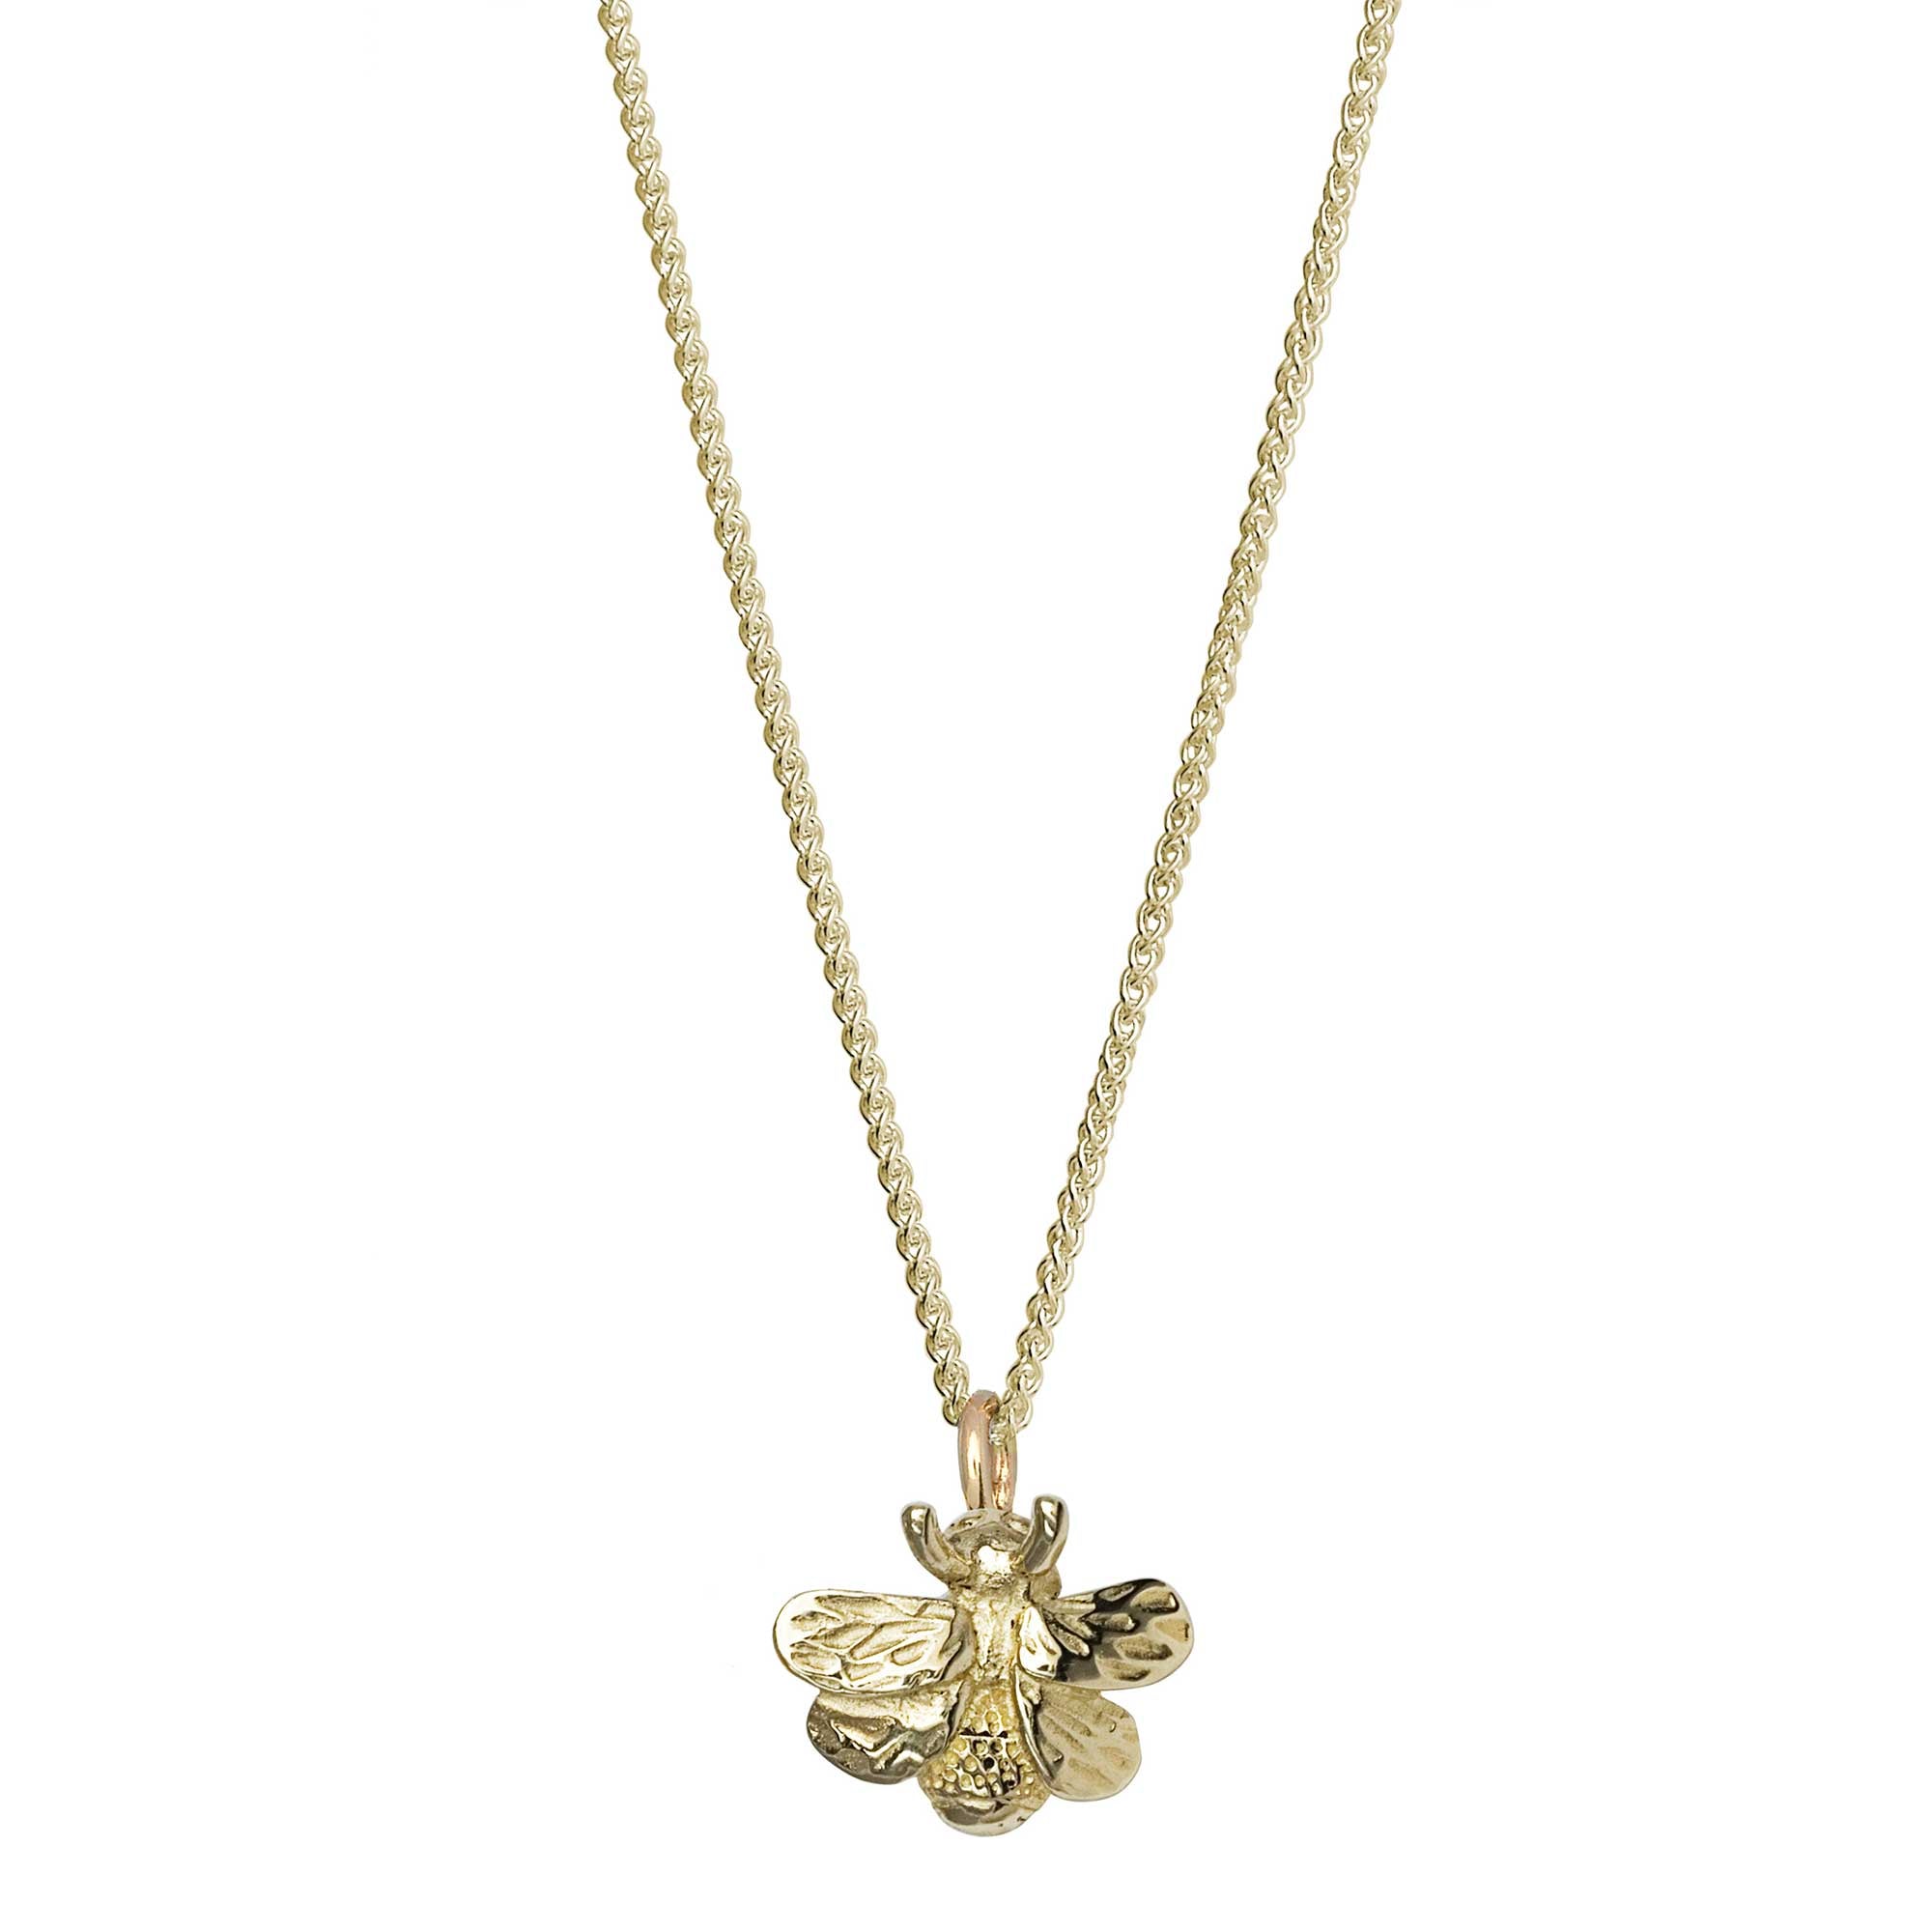 Solid gold bumble bee necklace recycled gold made in UK Scarlett Jewellery